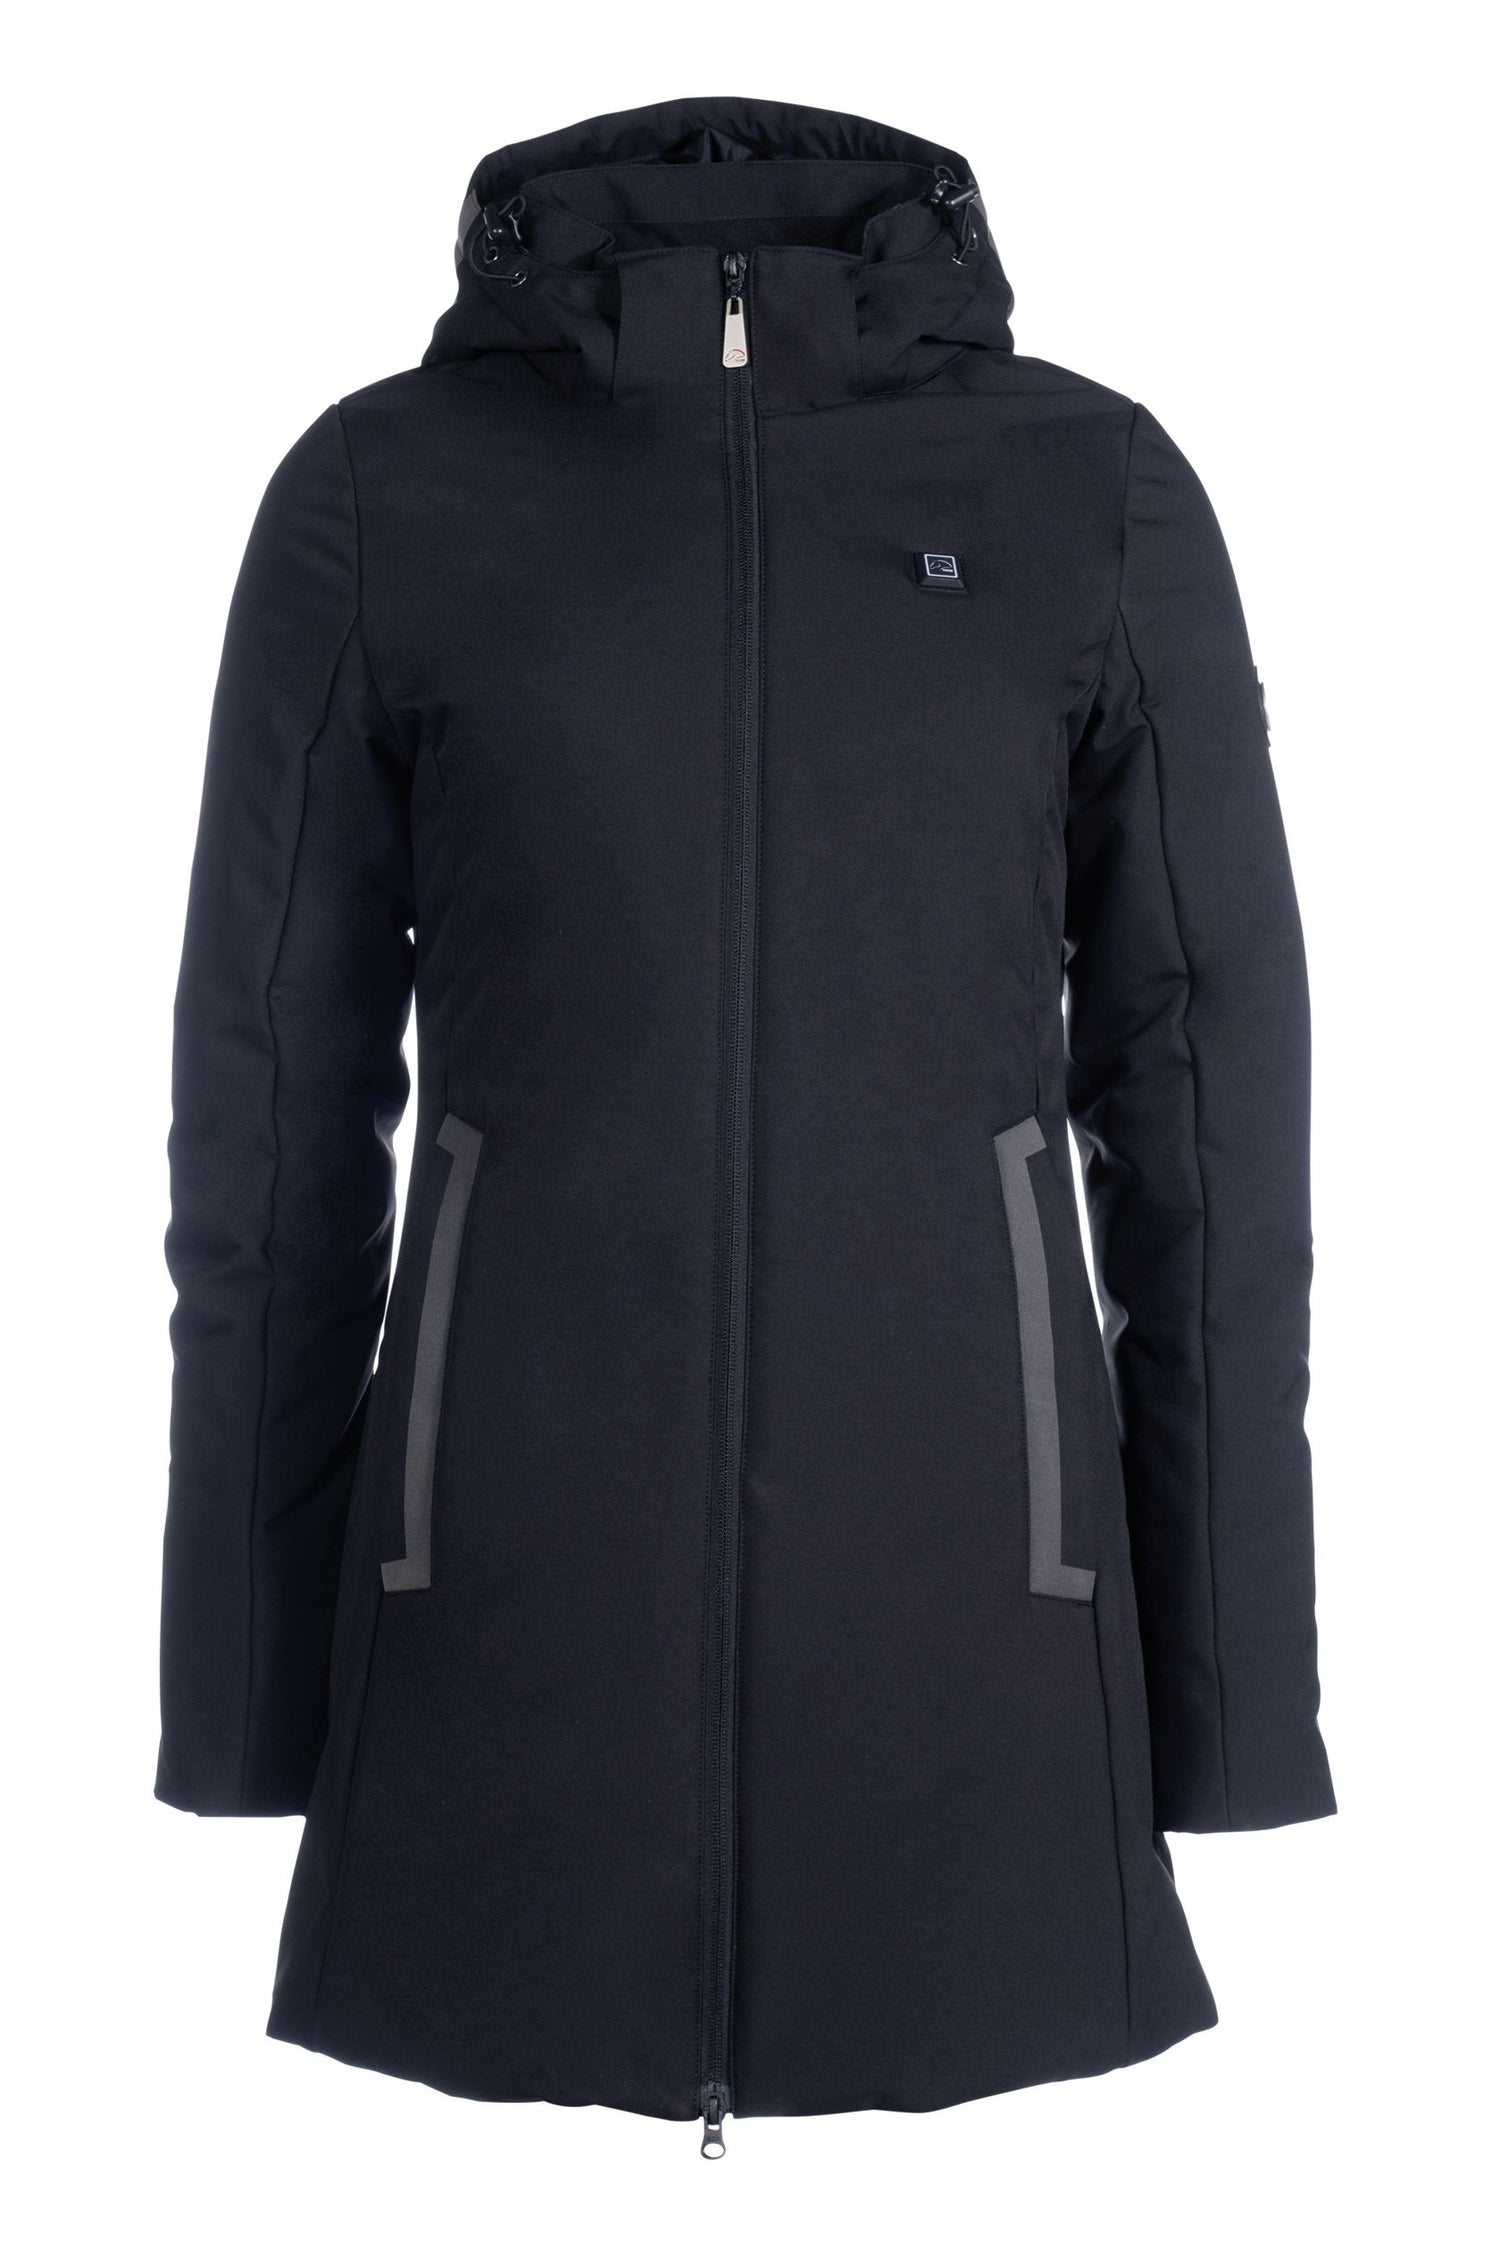 Heated riding jacket for equestrian